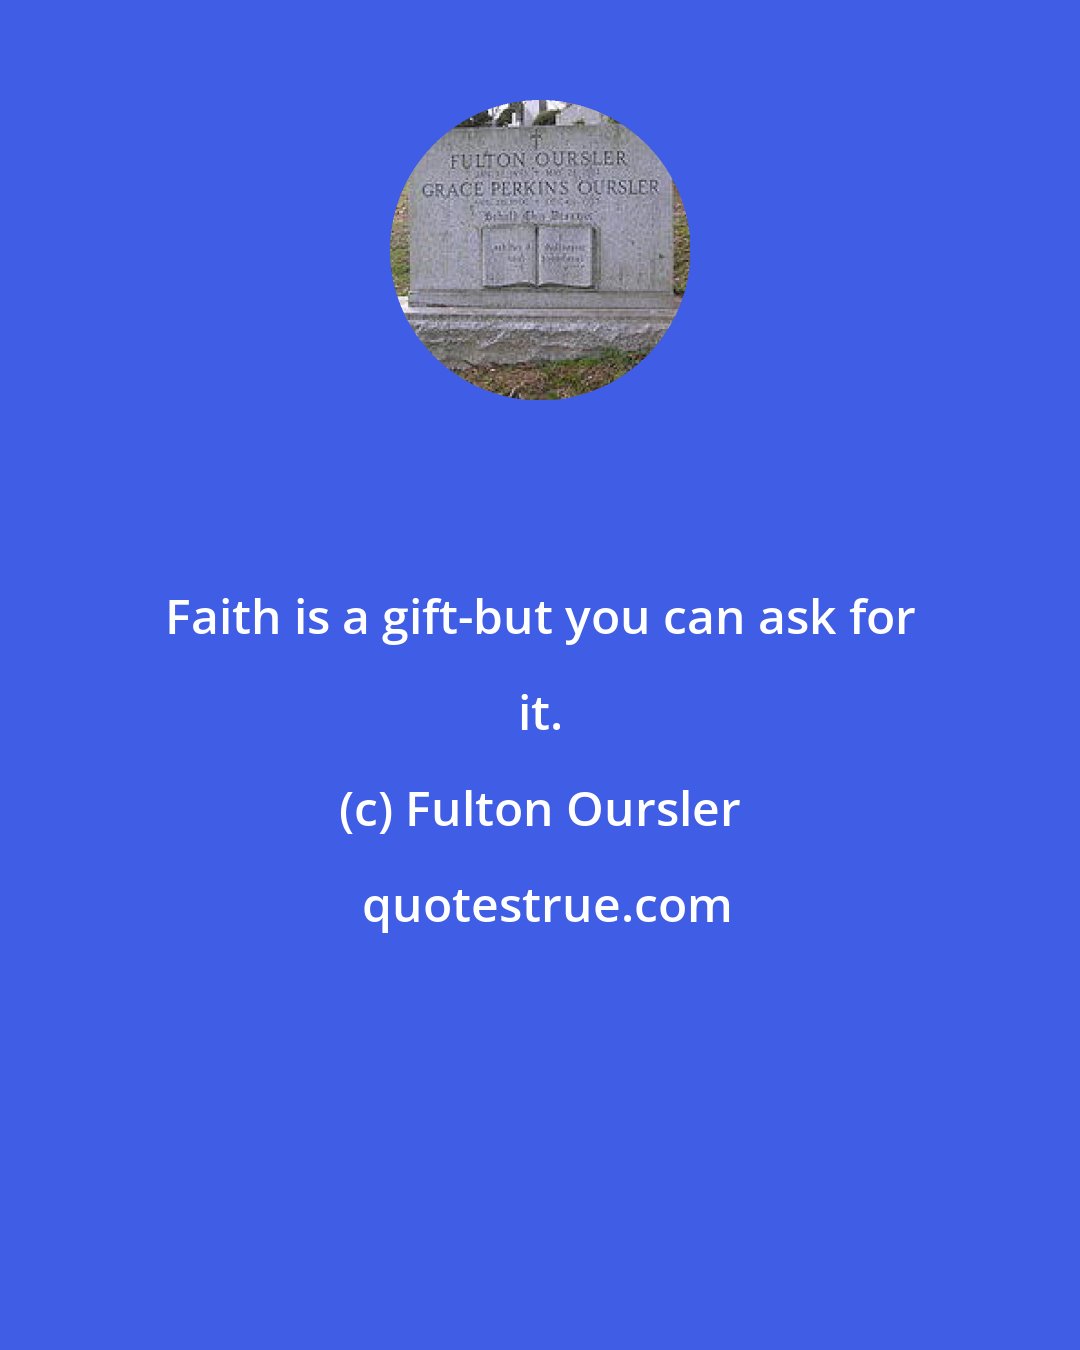 Fulton Oursler: Faith is a gift-but you can ask for it.